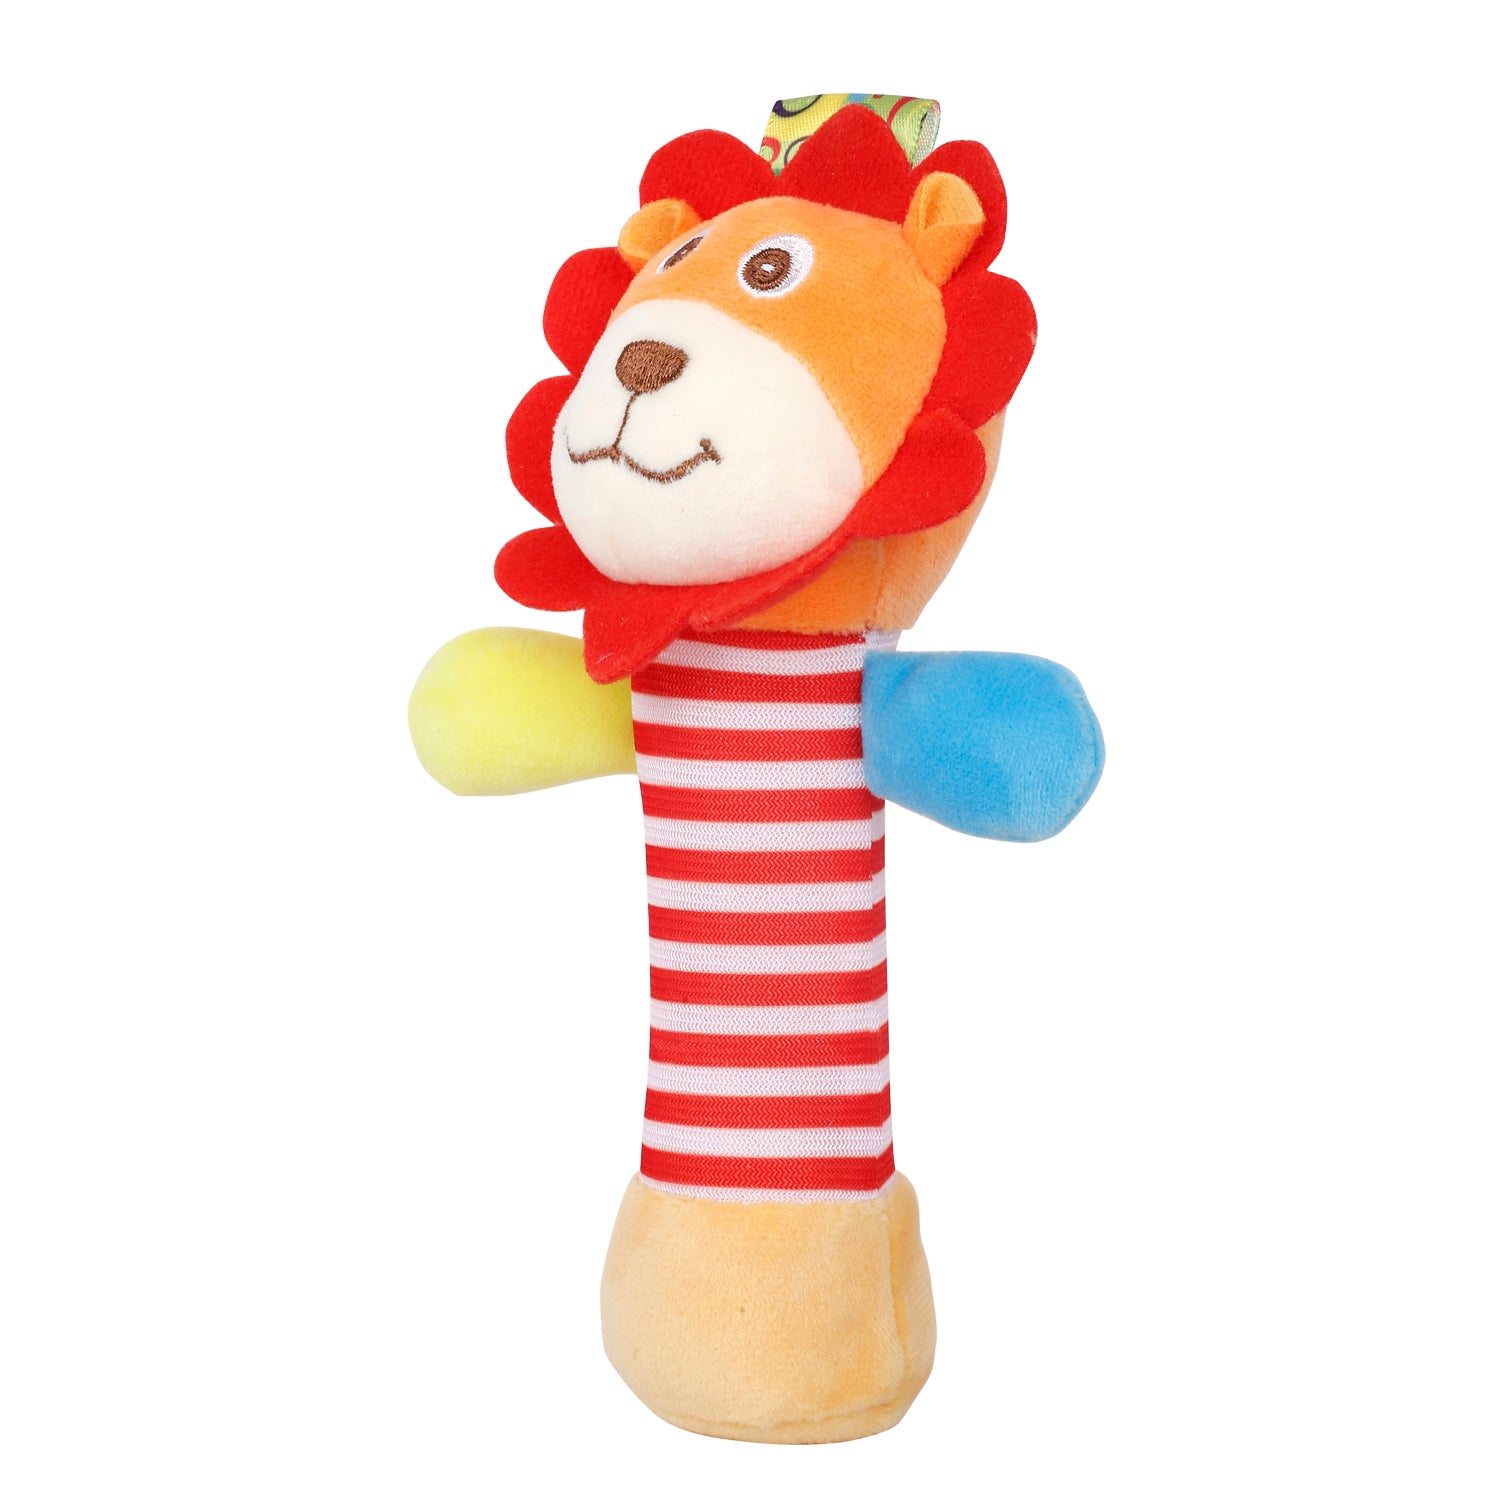 Baby Moo Lion Cub Red And Orange Handheld Rattle Toy